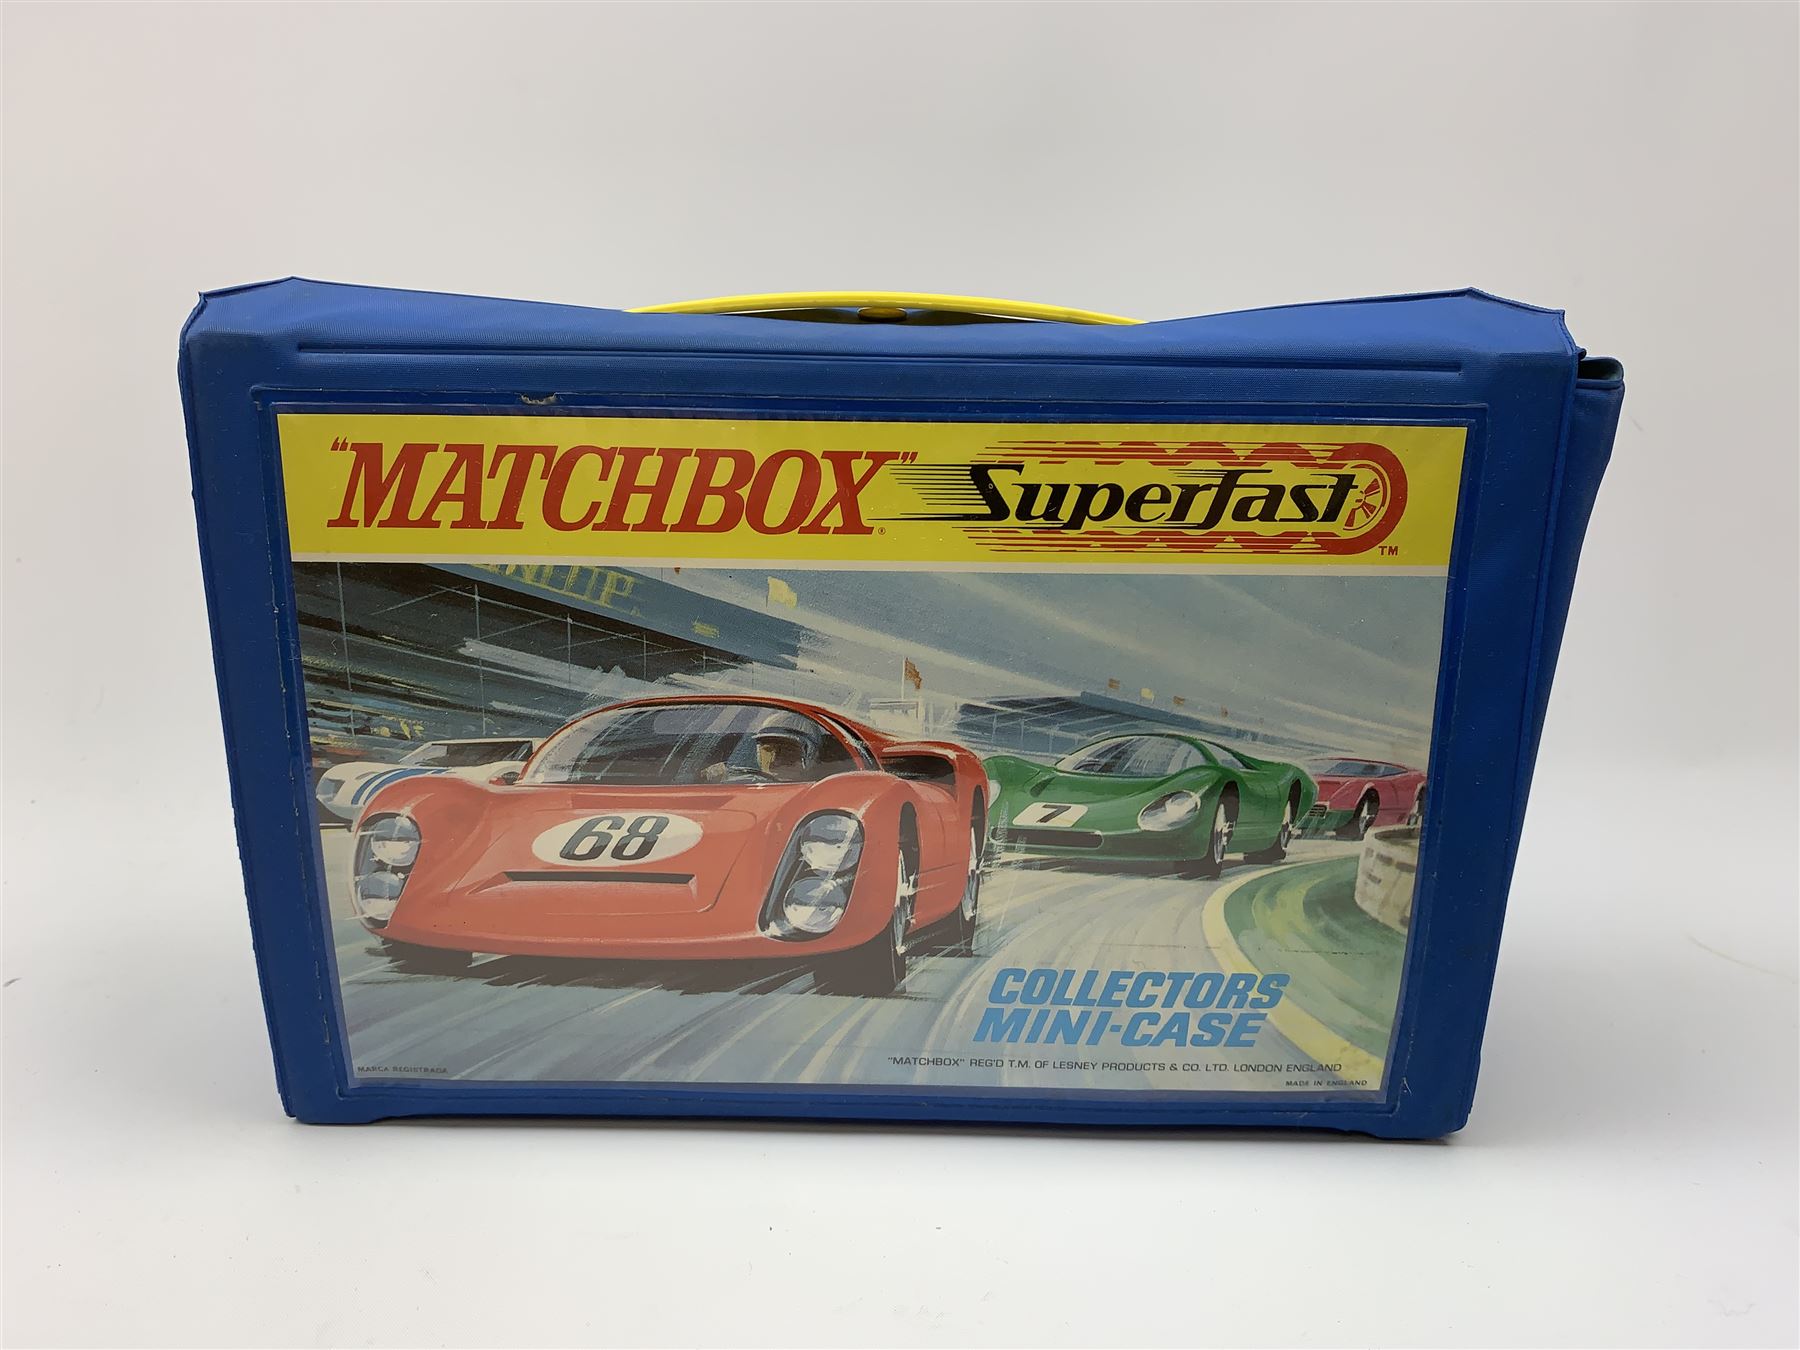 Matchbox Superfast Collectors Mini Case Containing Two Lift Out Trays